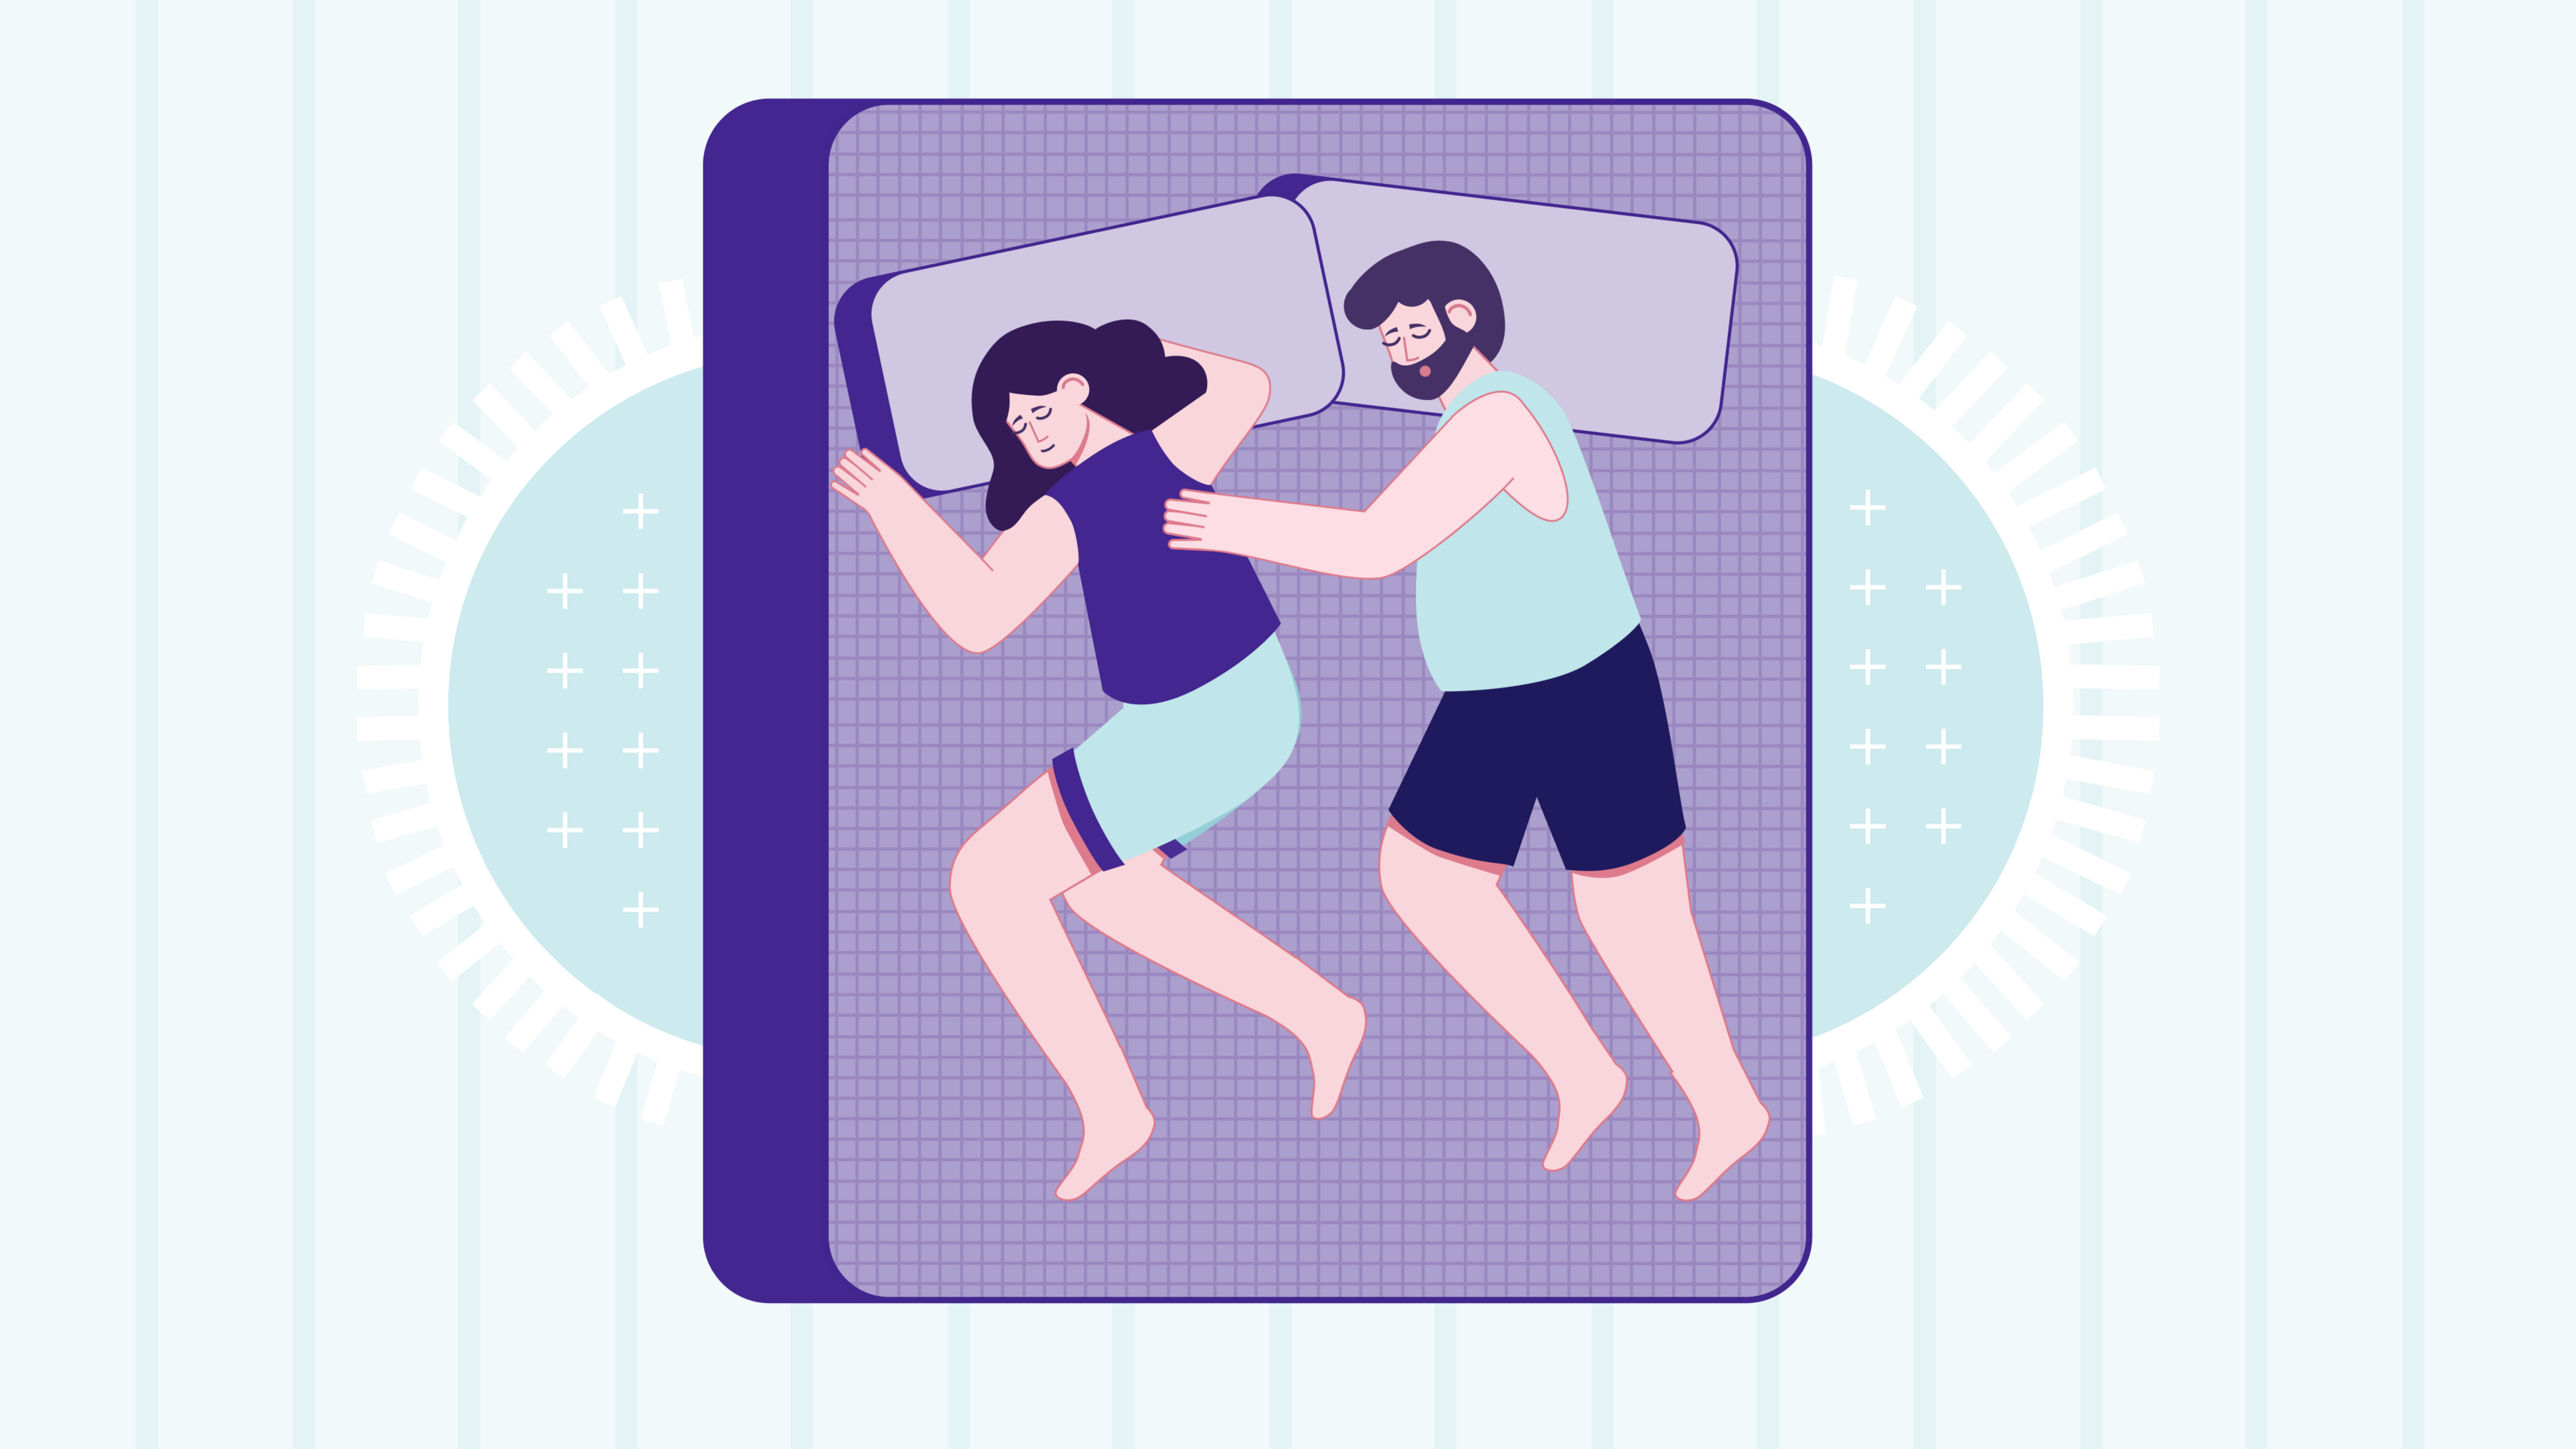 man in woman in chasing spoon sleep position